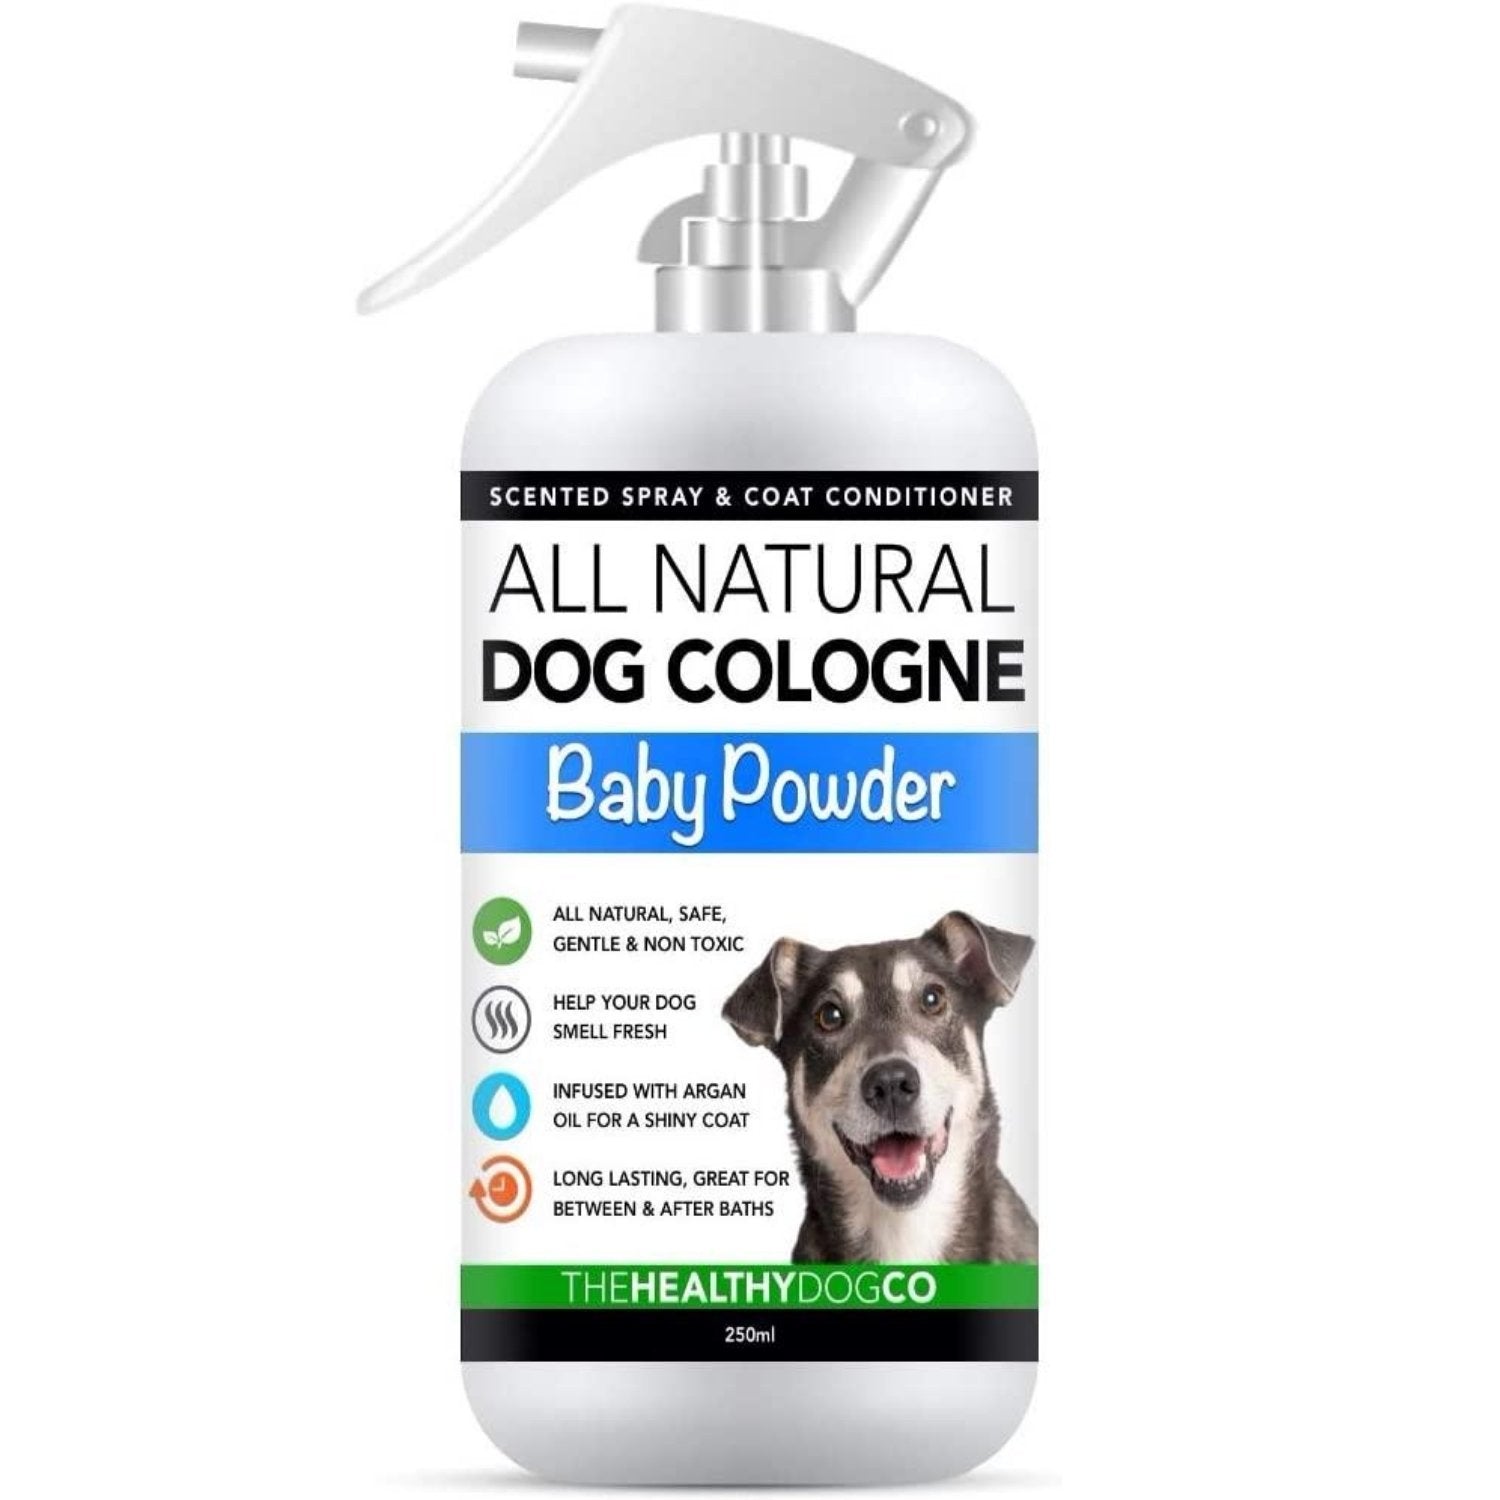 All-Natural Dog Cologne Baby Powder Scent - The Healthy Dog Co